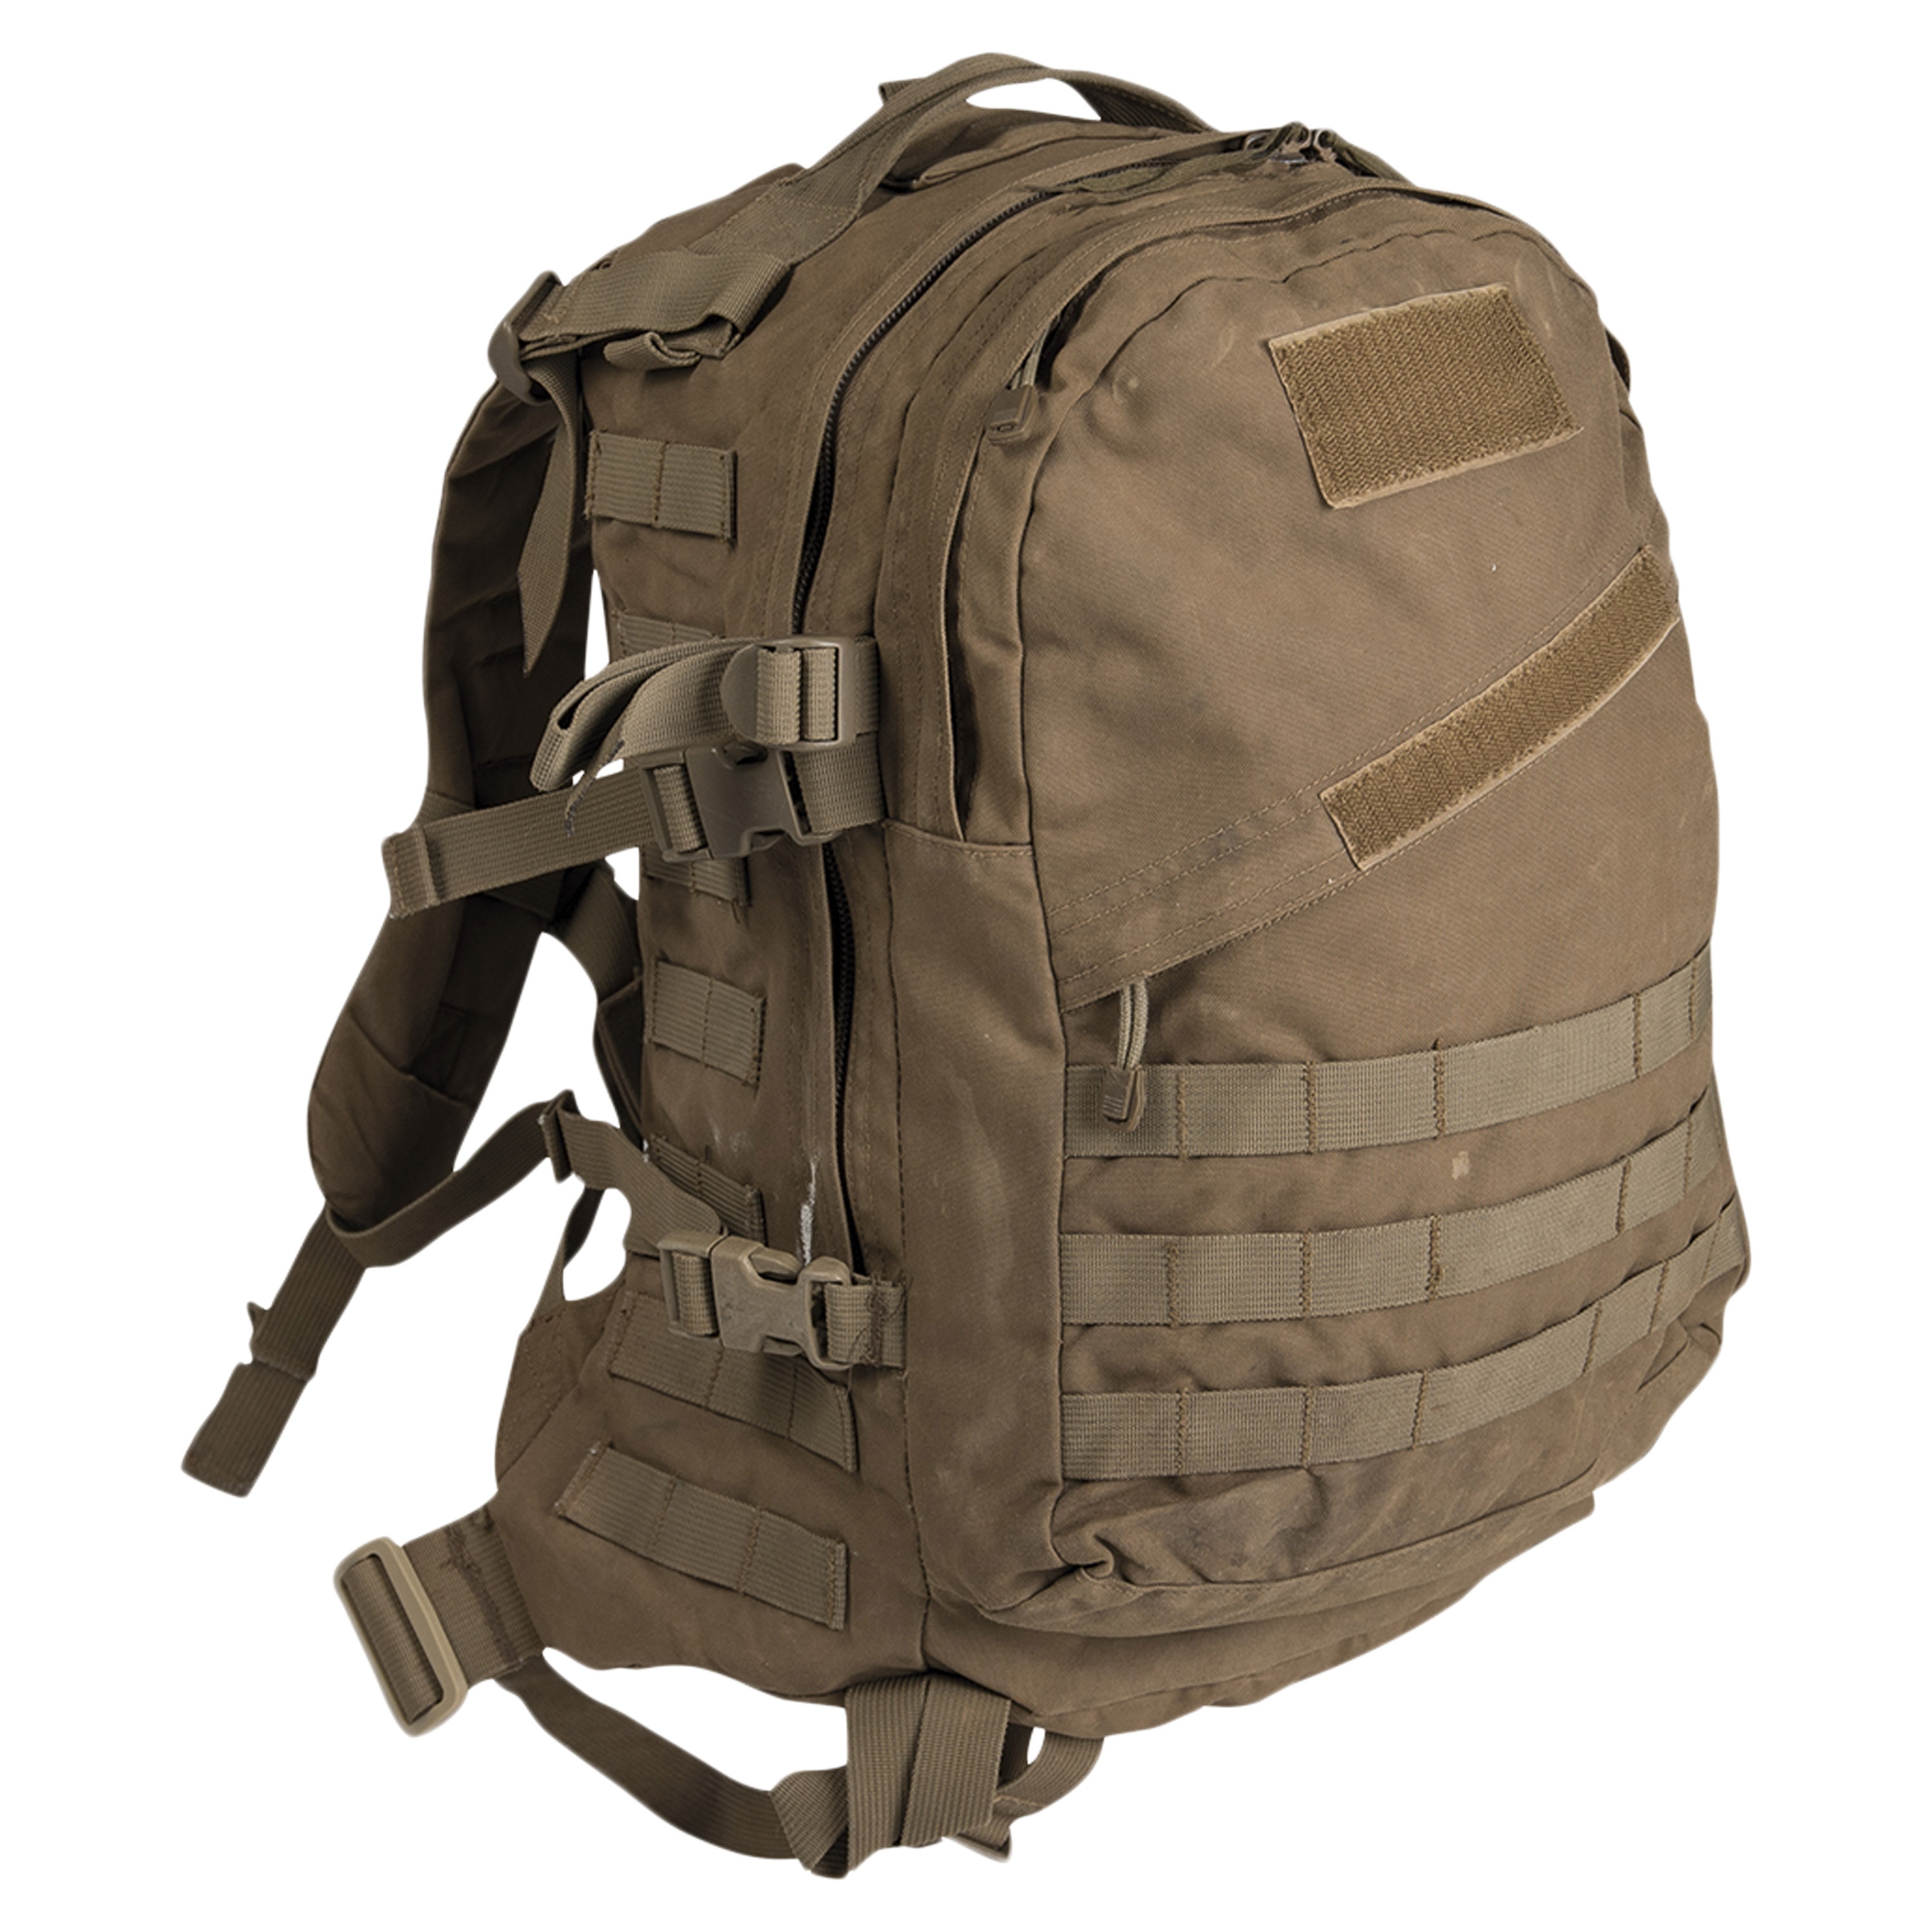 Military day pack